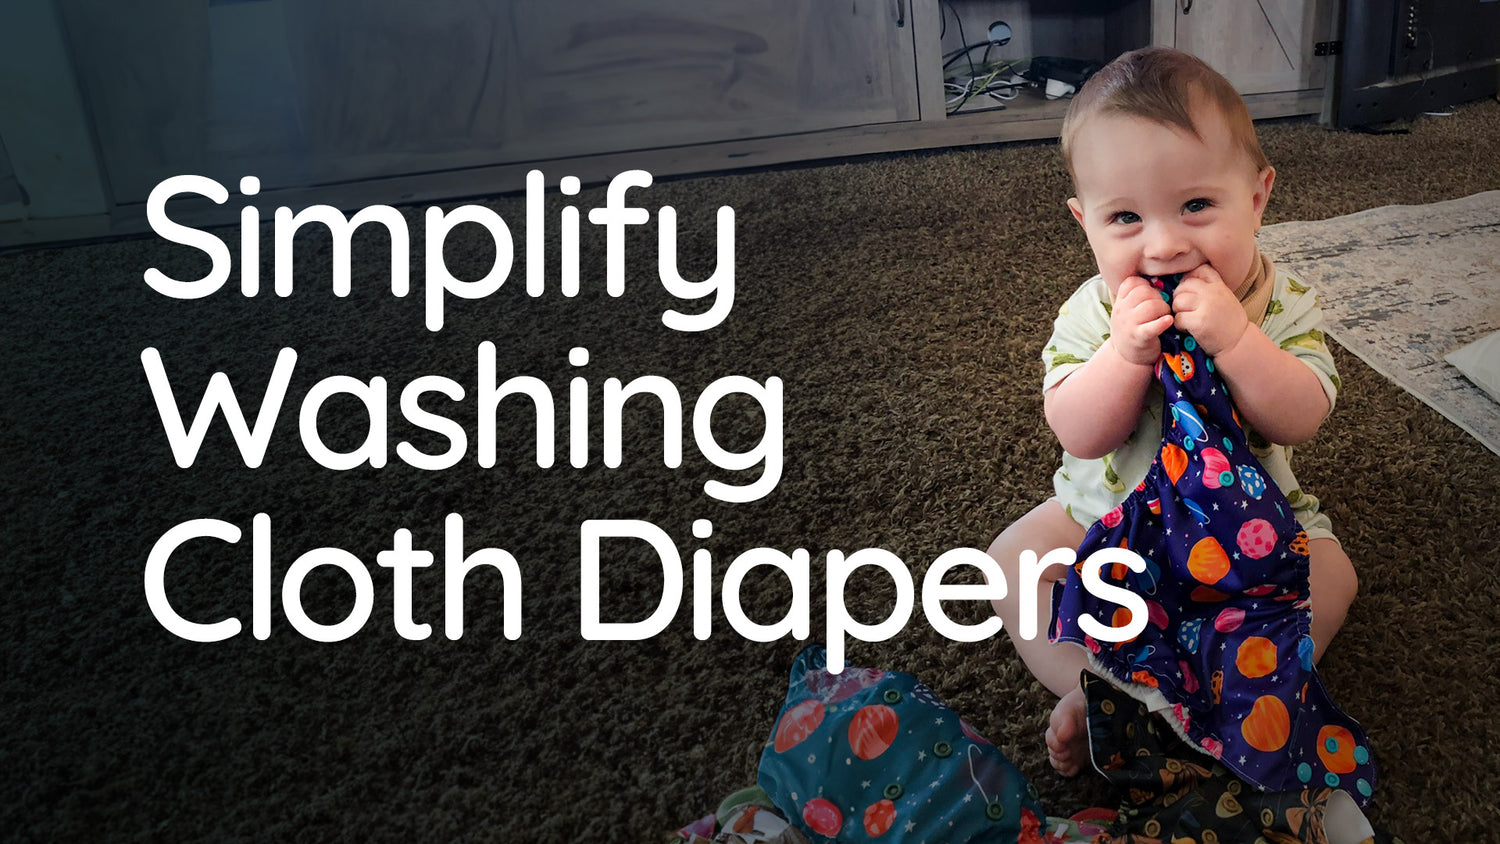 Cloth Diapering Mom, Hailey, Shares: How to deal with information overload around cloth diapering wash routines